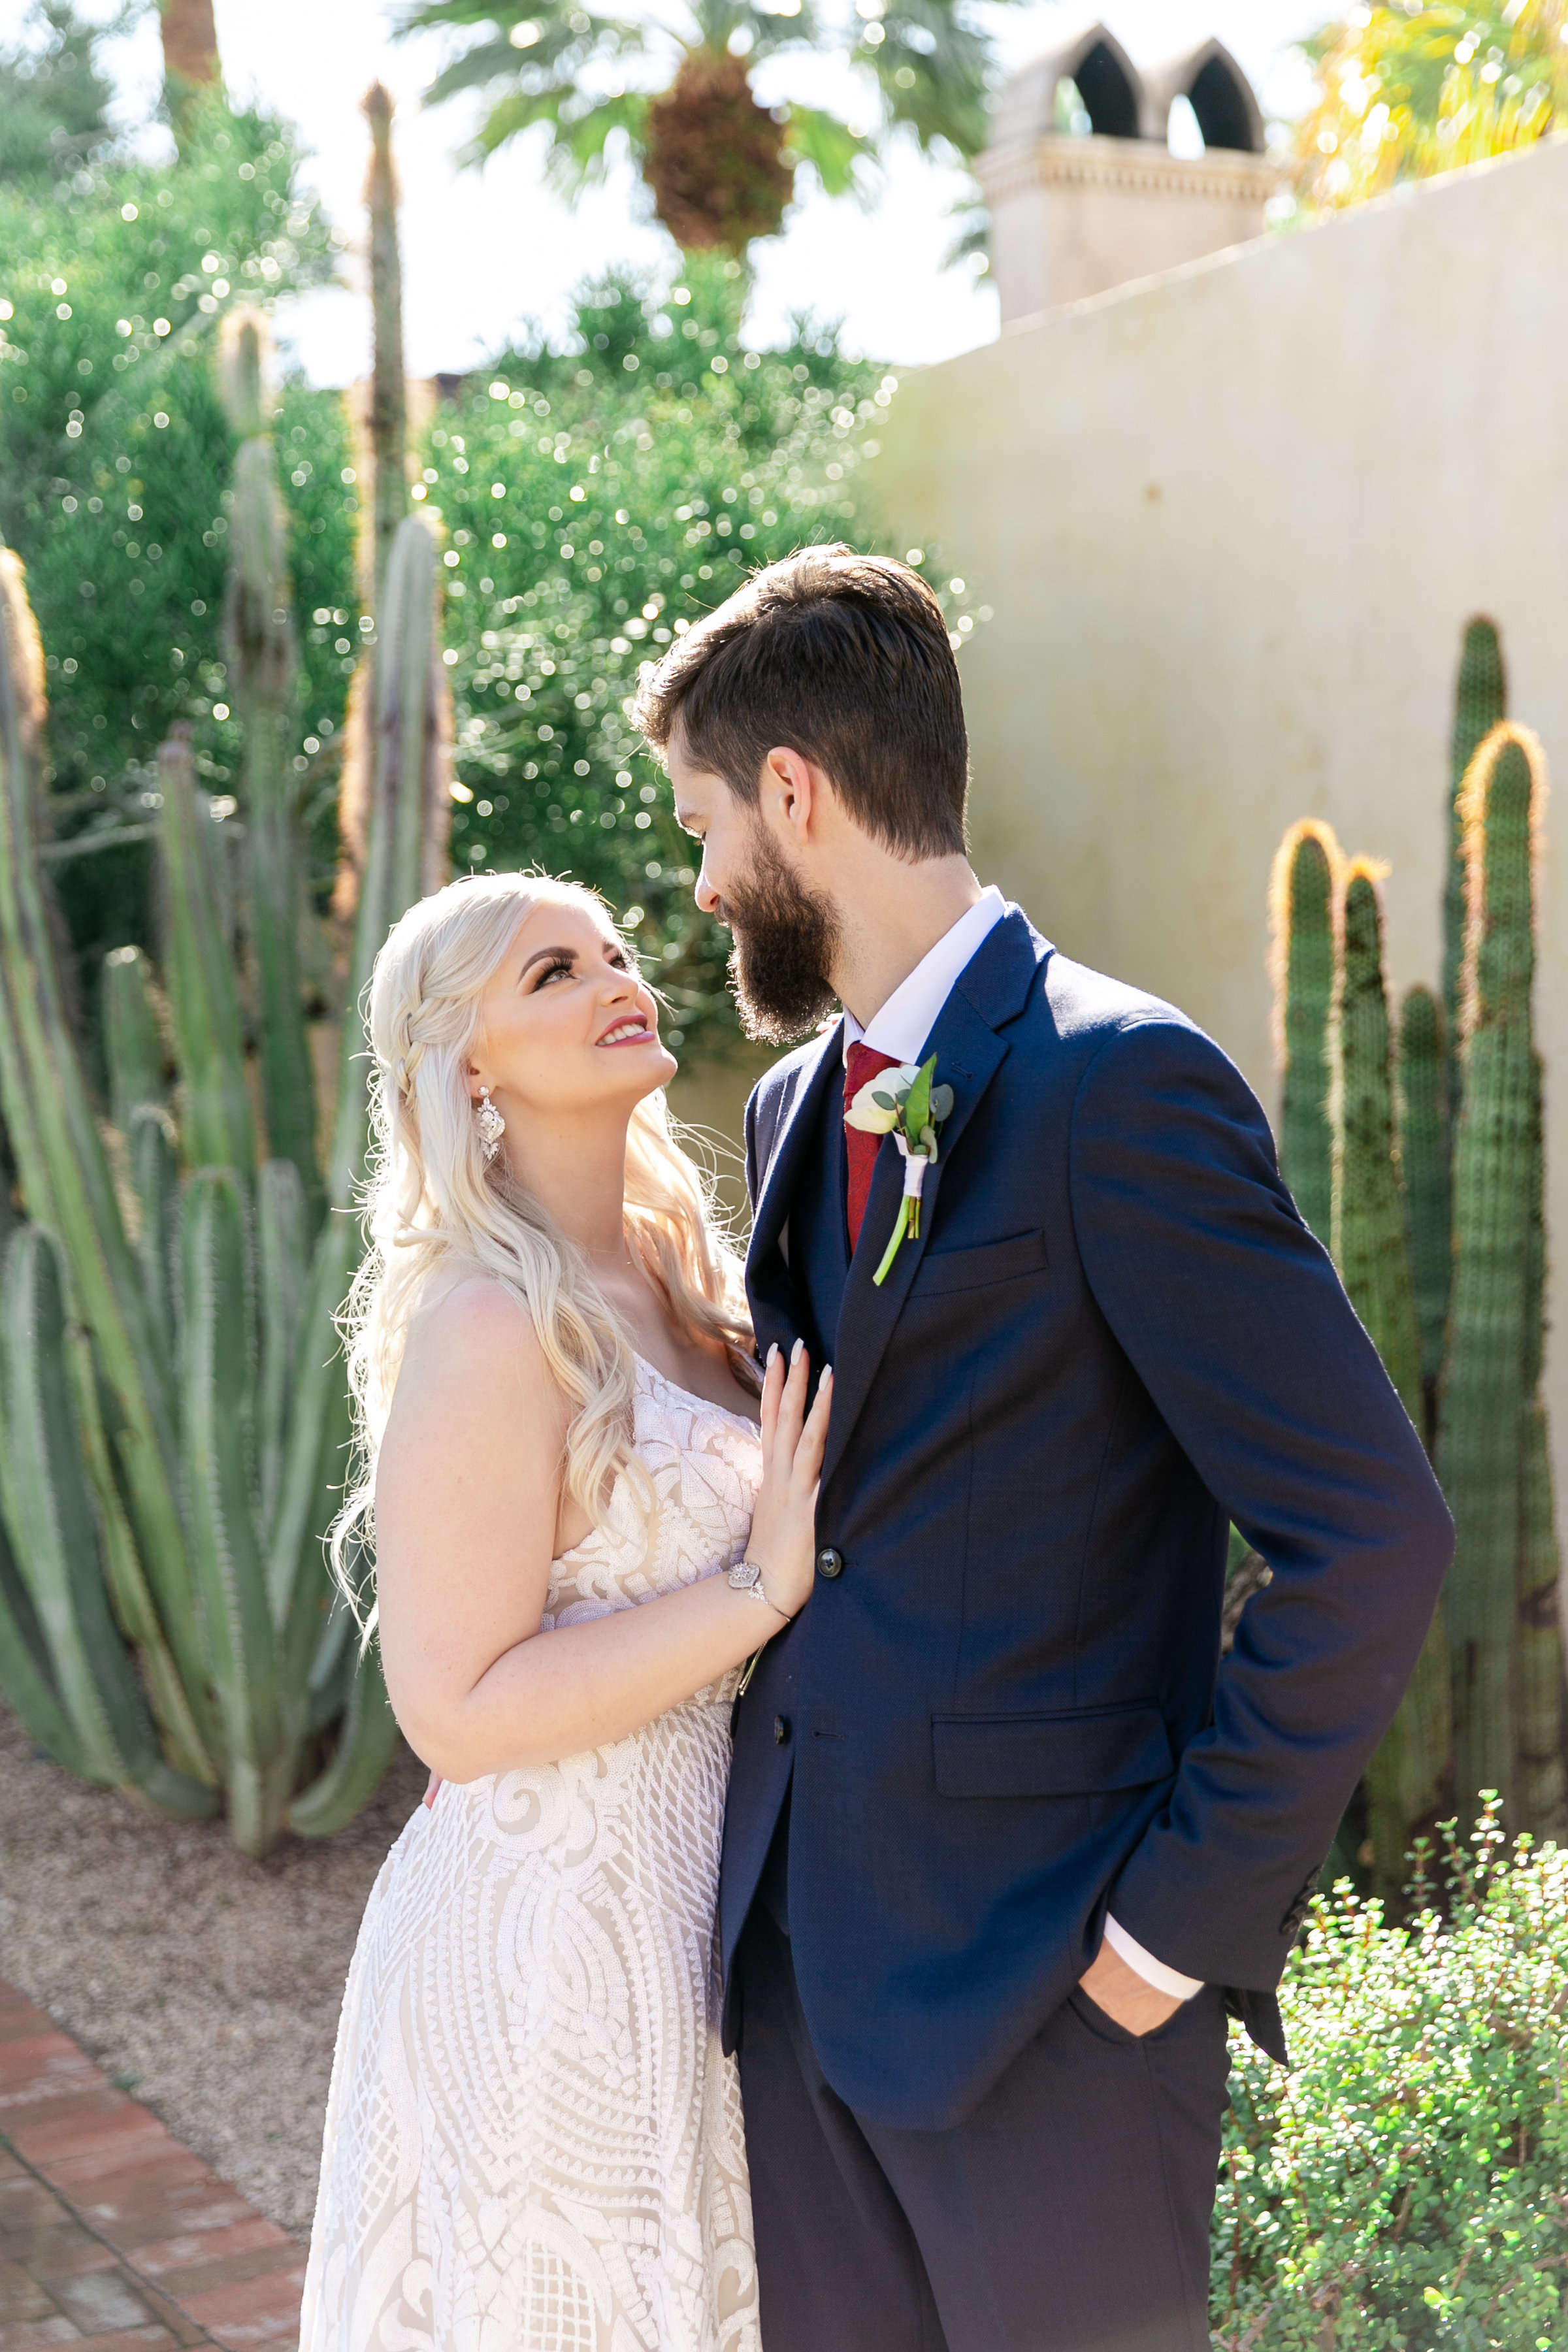 Karlie Colleen Photography - The Royal Palms Wedding - Some Like It Classic - Alex & Sam-150